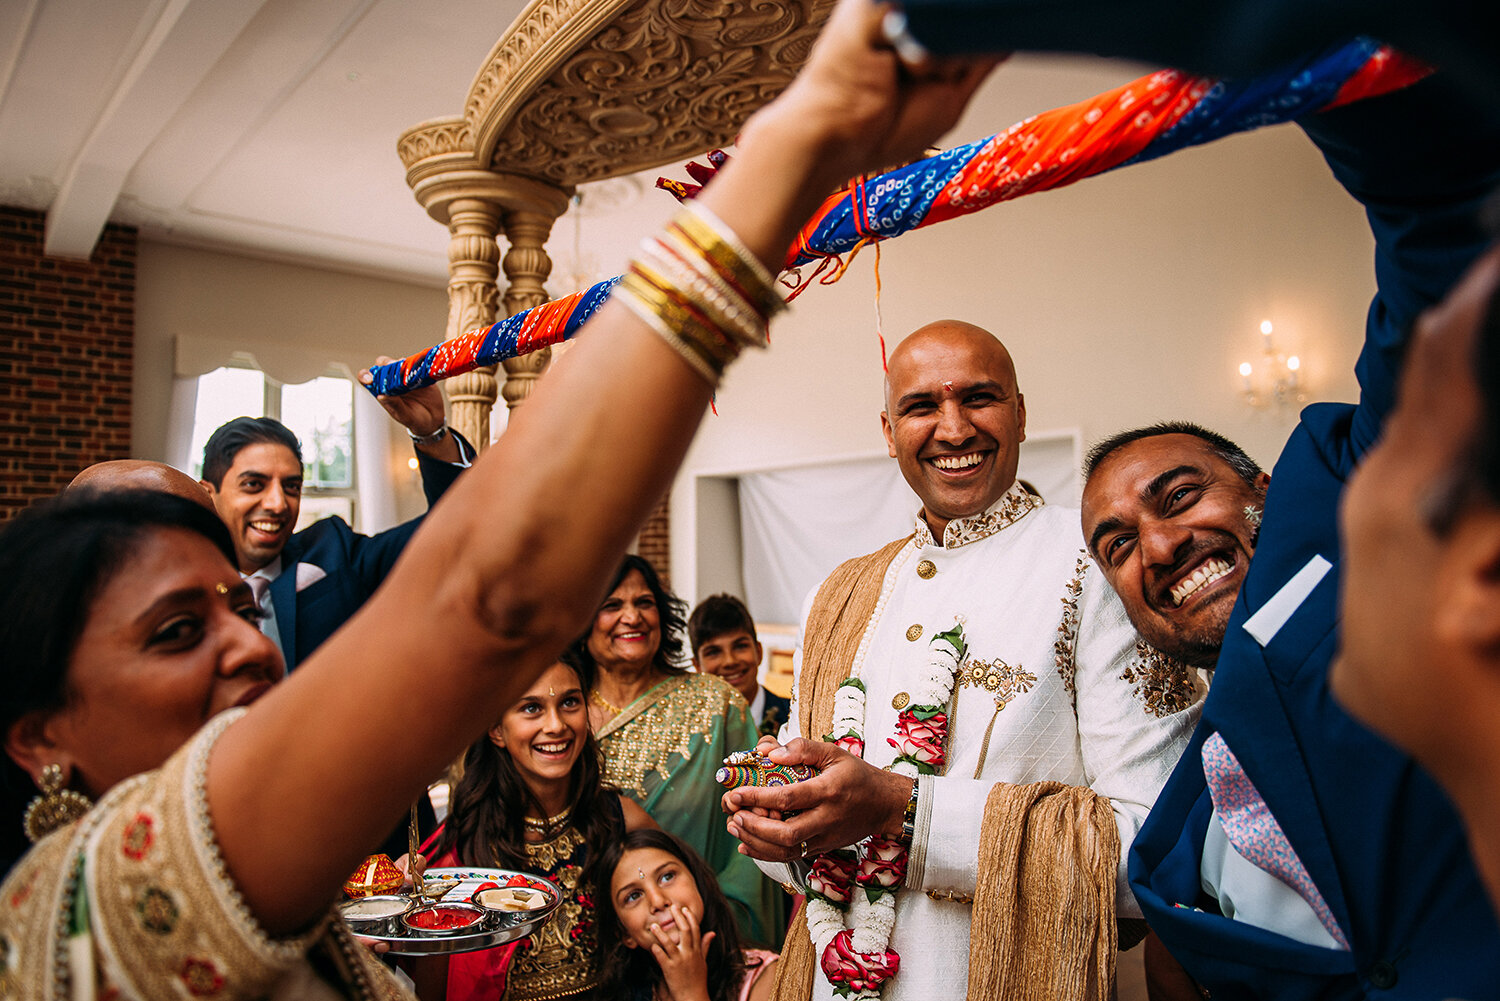  family traditions for the groom to pass before he cn marry his bride 